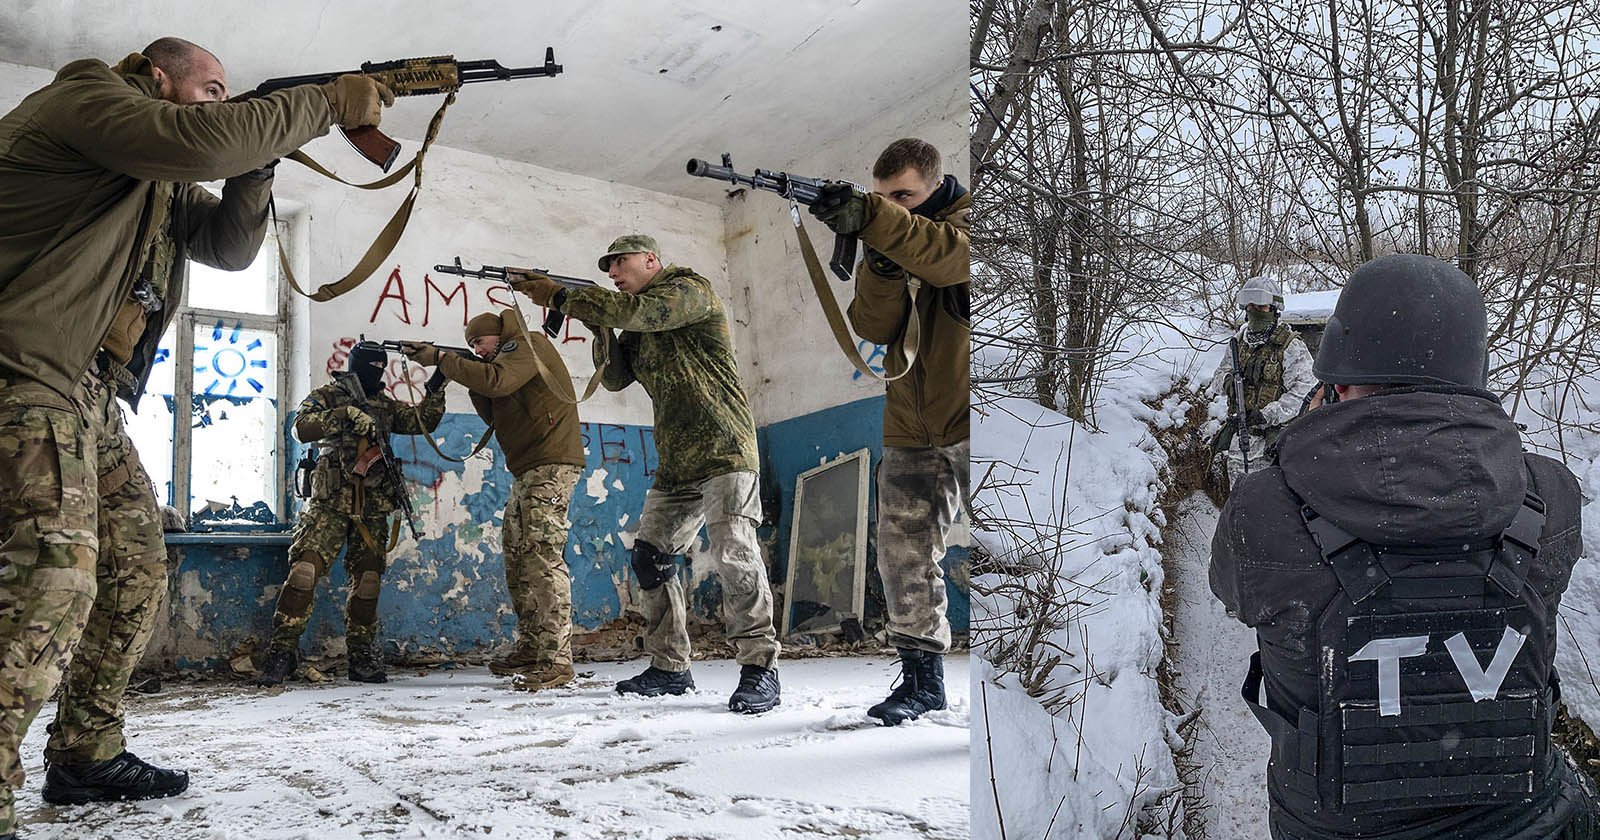 How to Stay Safe While Photographing the War in Ukraine